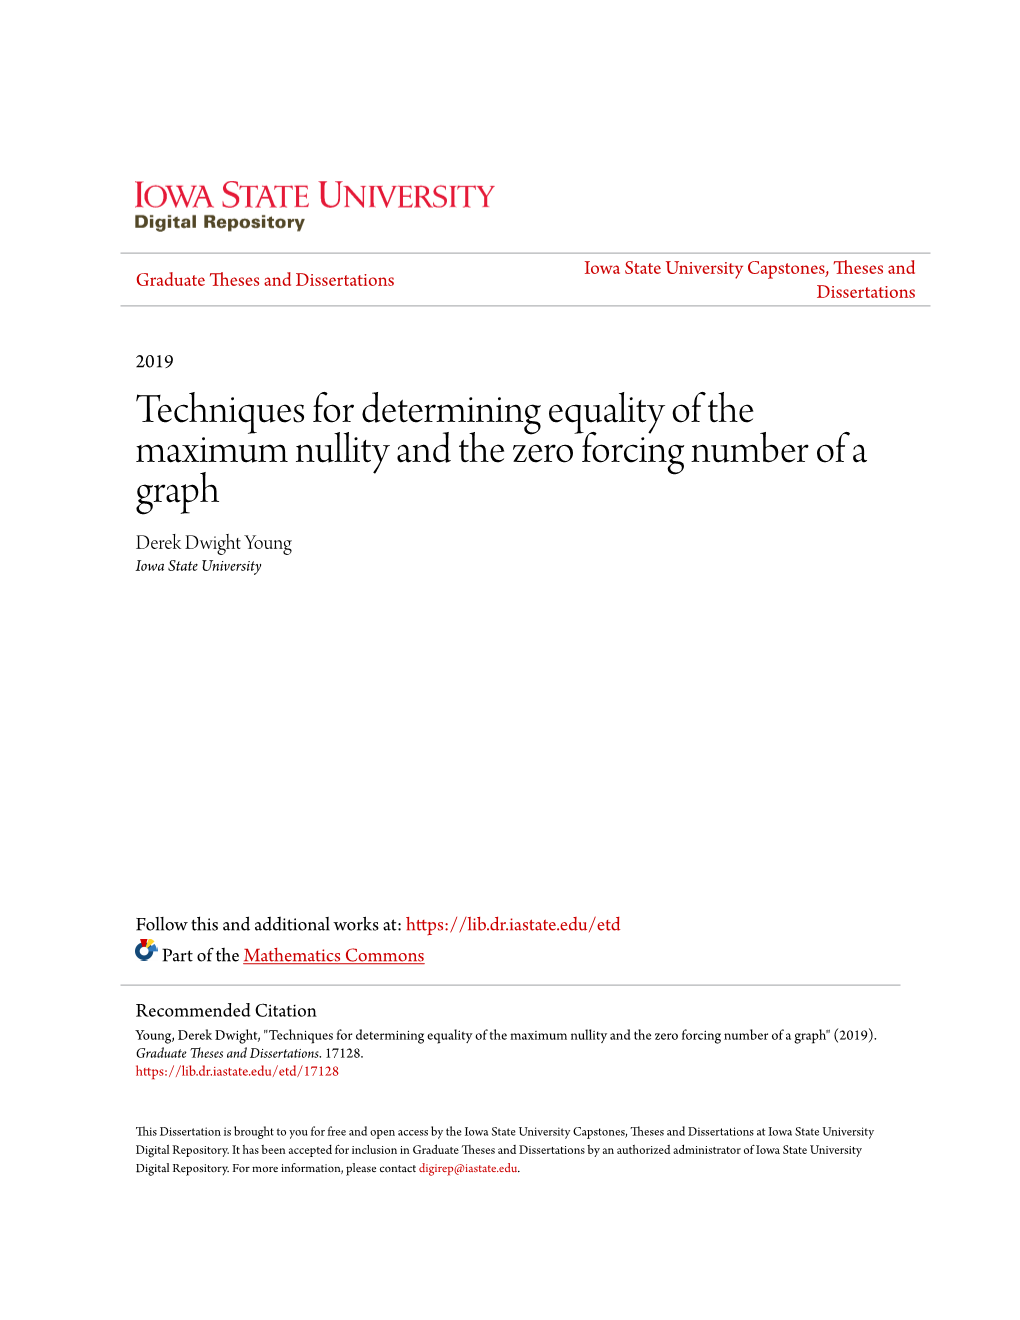 Techniques for Determining Equality of the Maximum Nullity and the Zero Forcing Number of a Graph Derek Dwight Young Iowa State University